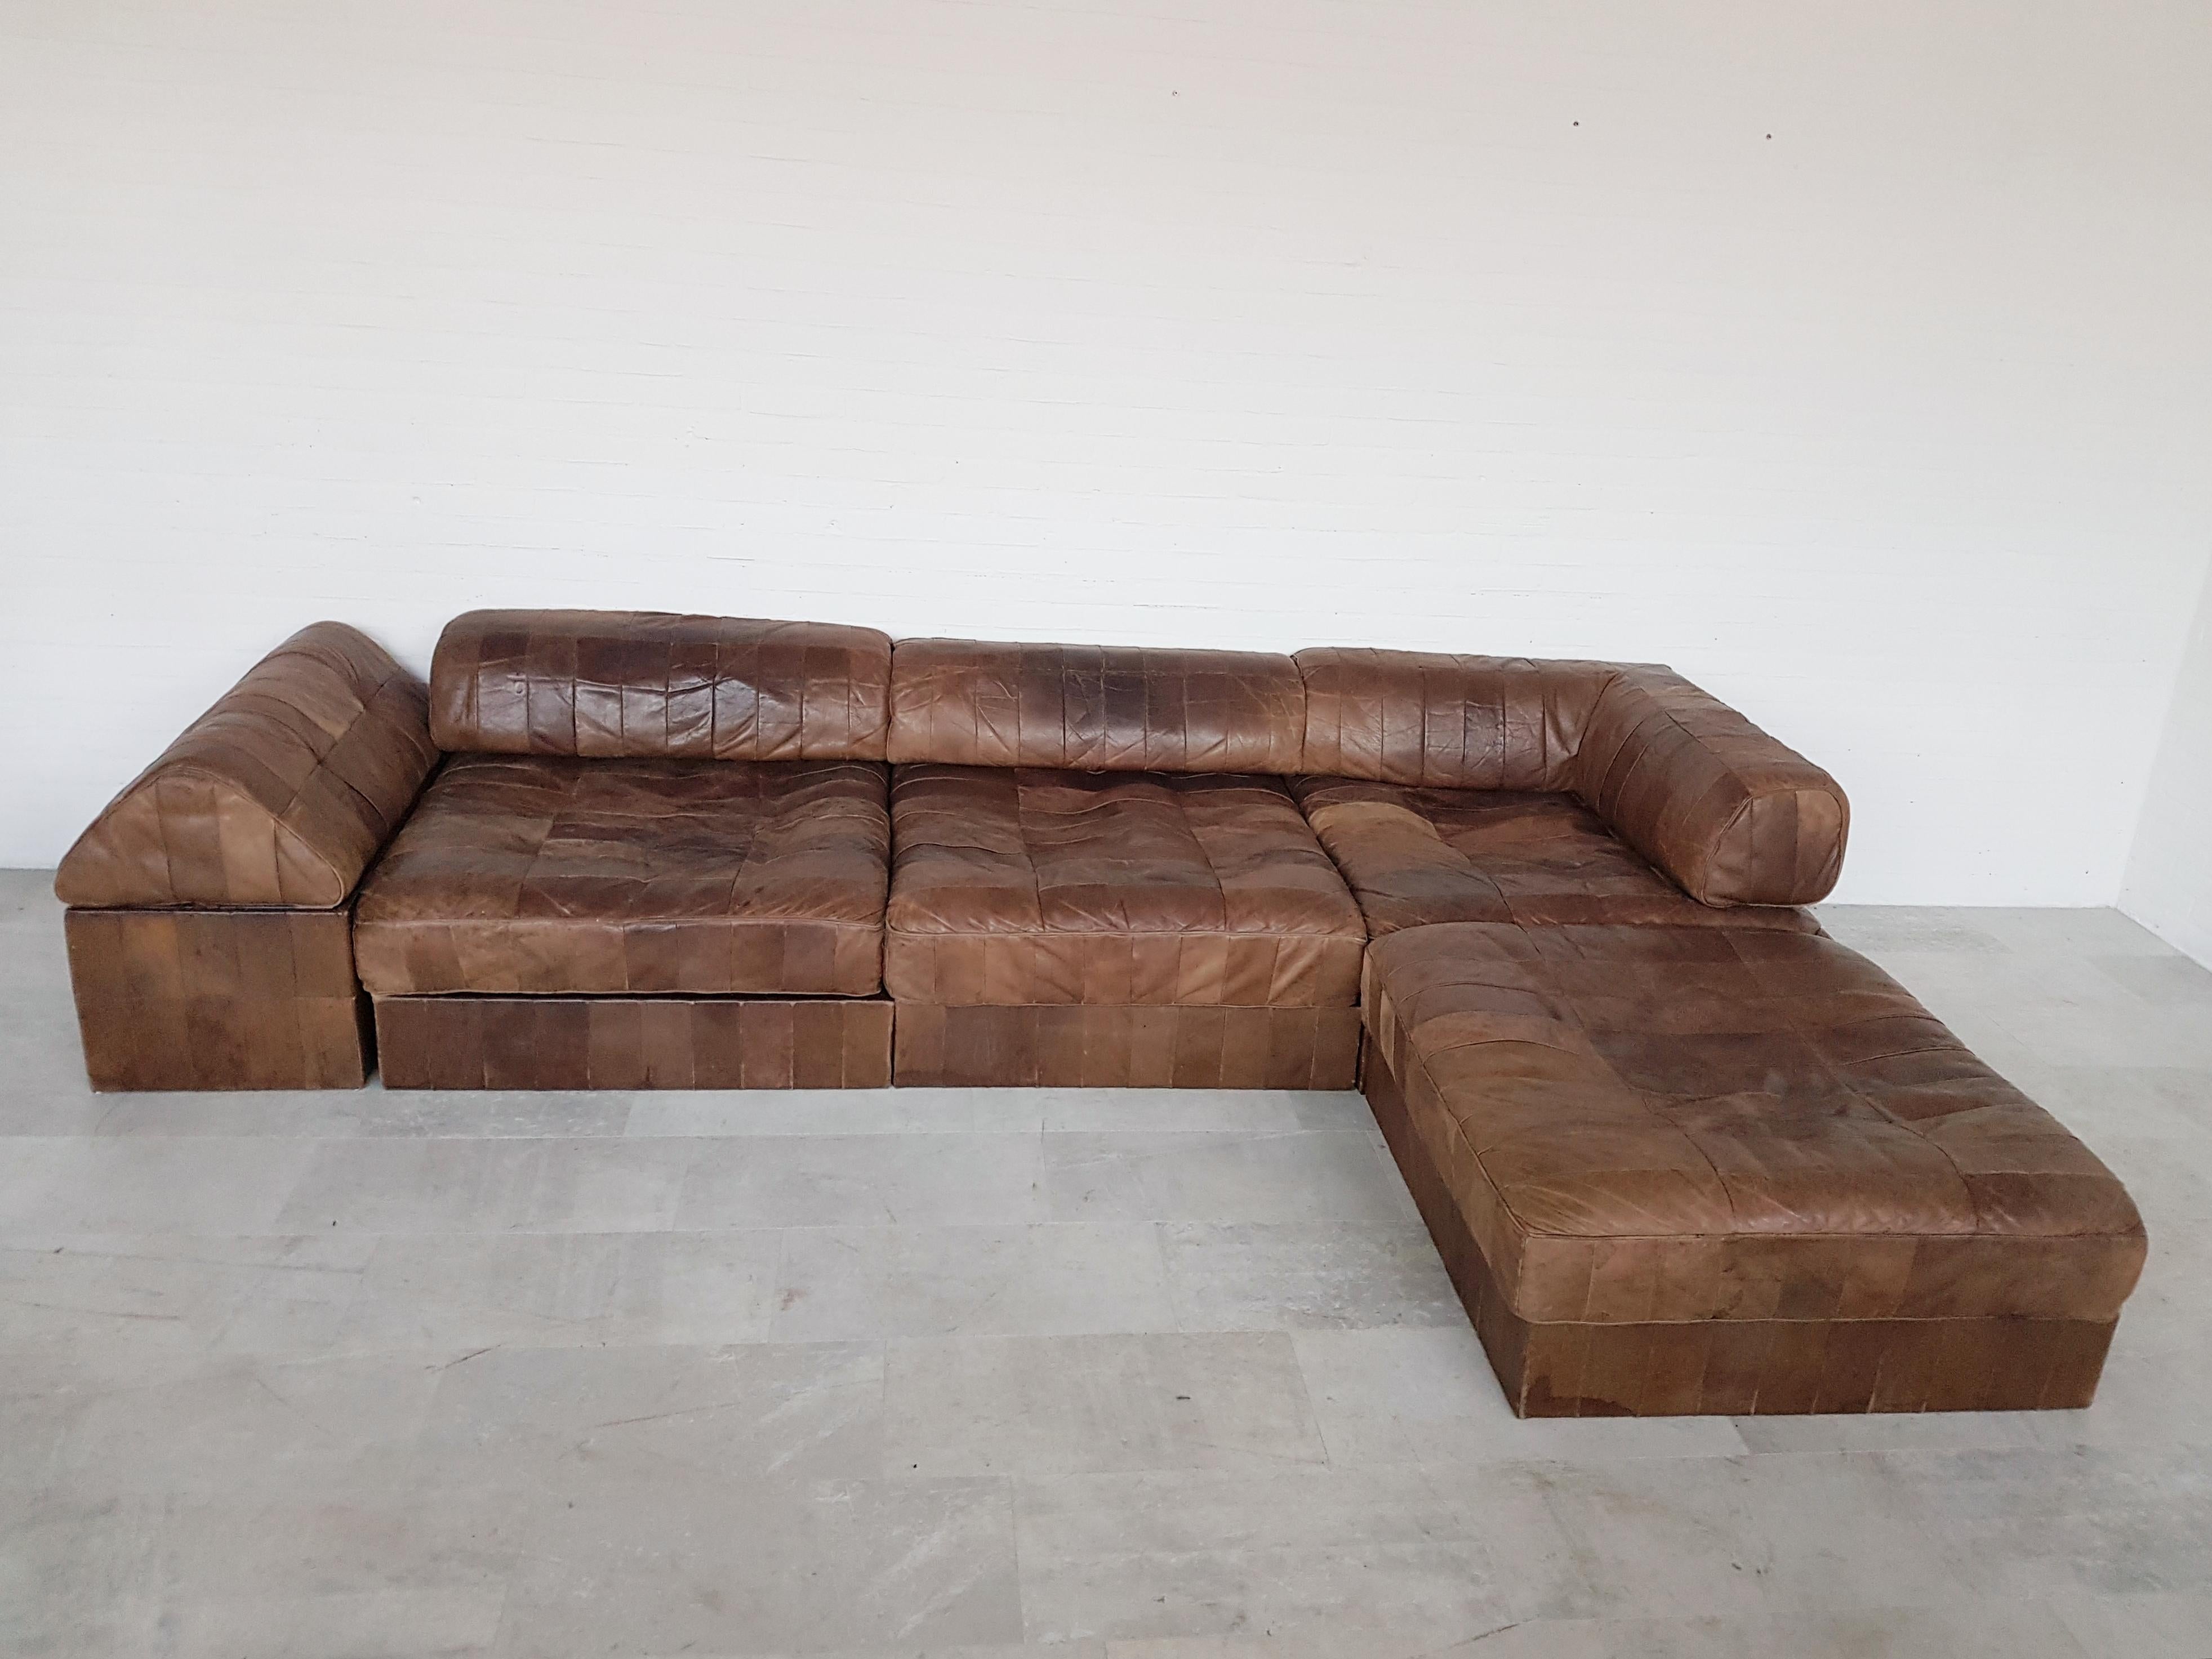 Mid-Century Modern sectional sofa by De Sede Switzerland.


The whole set consists of 13 pieces.